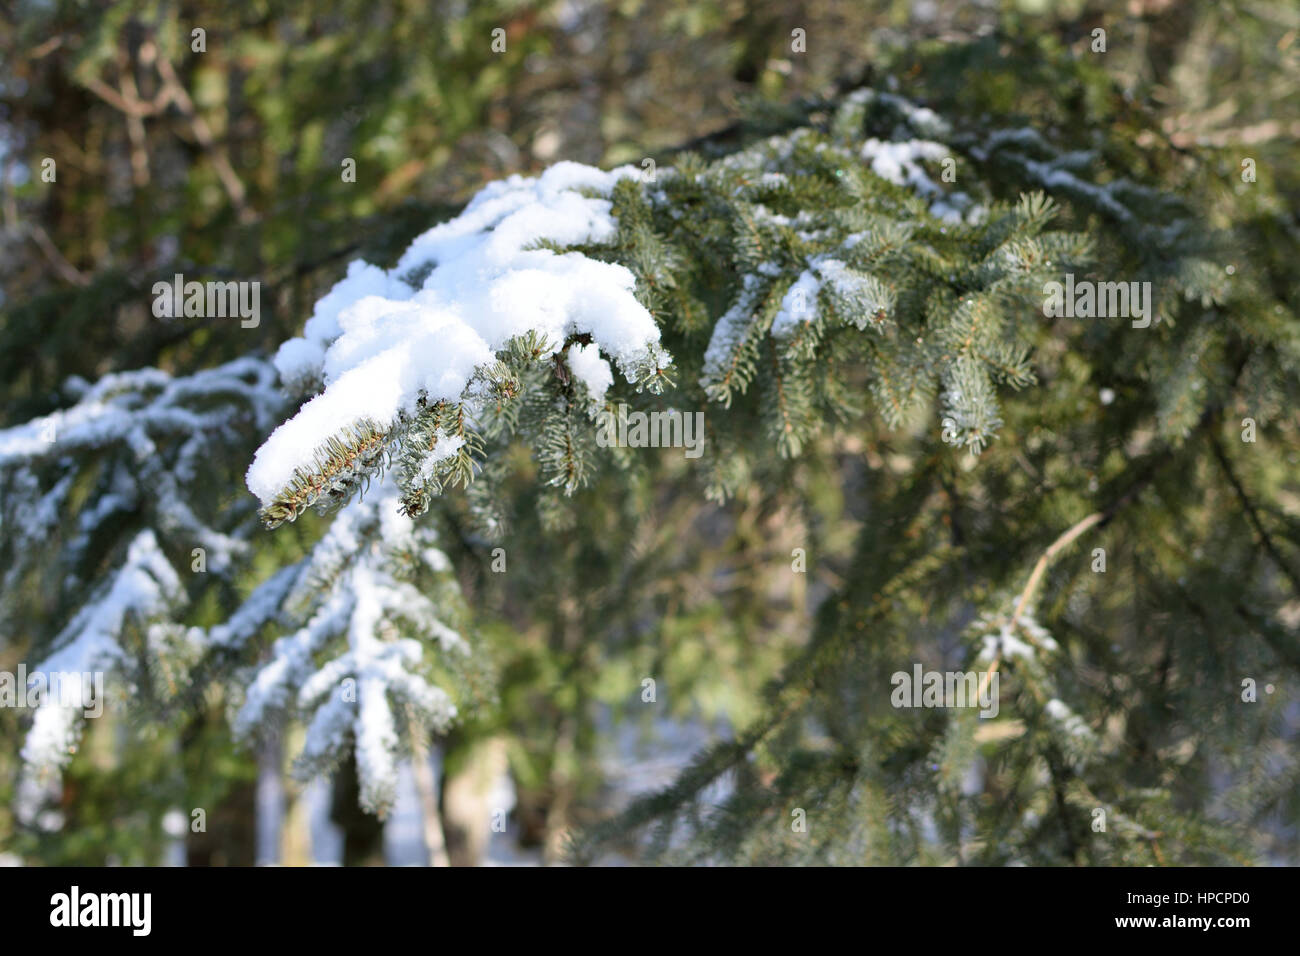 Snow on White Spruce (Picea glauca) Branch Stock Photo